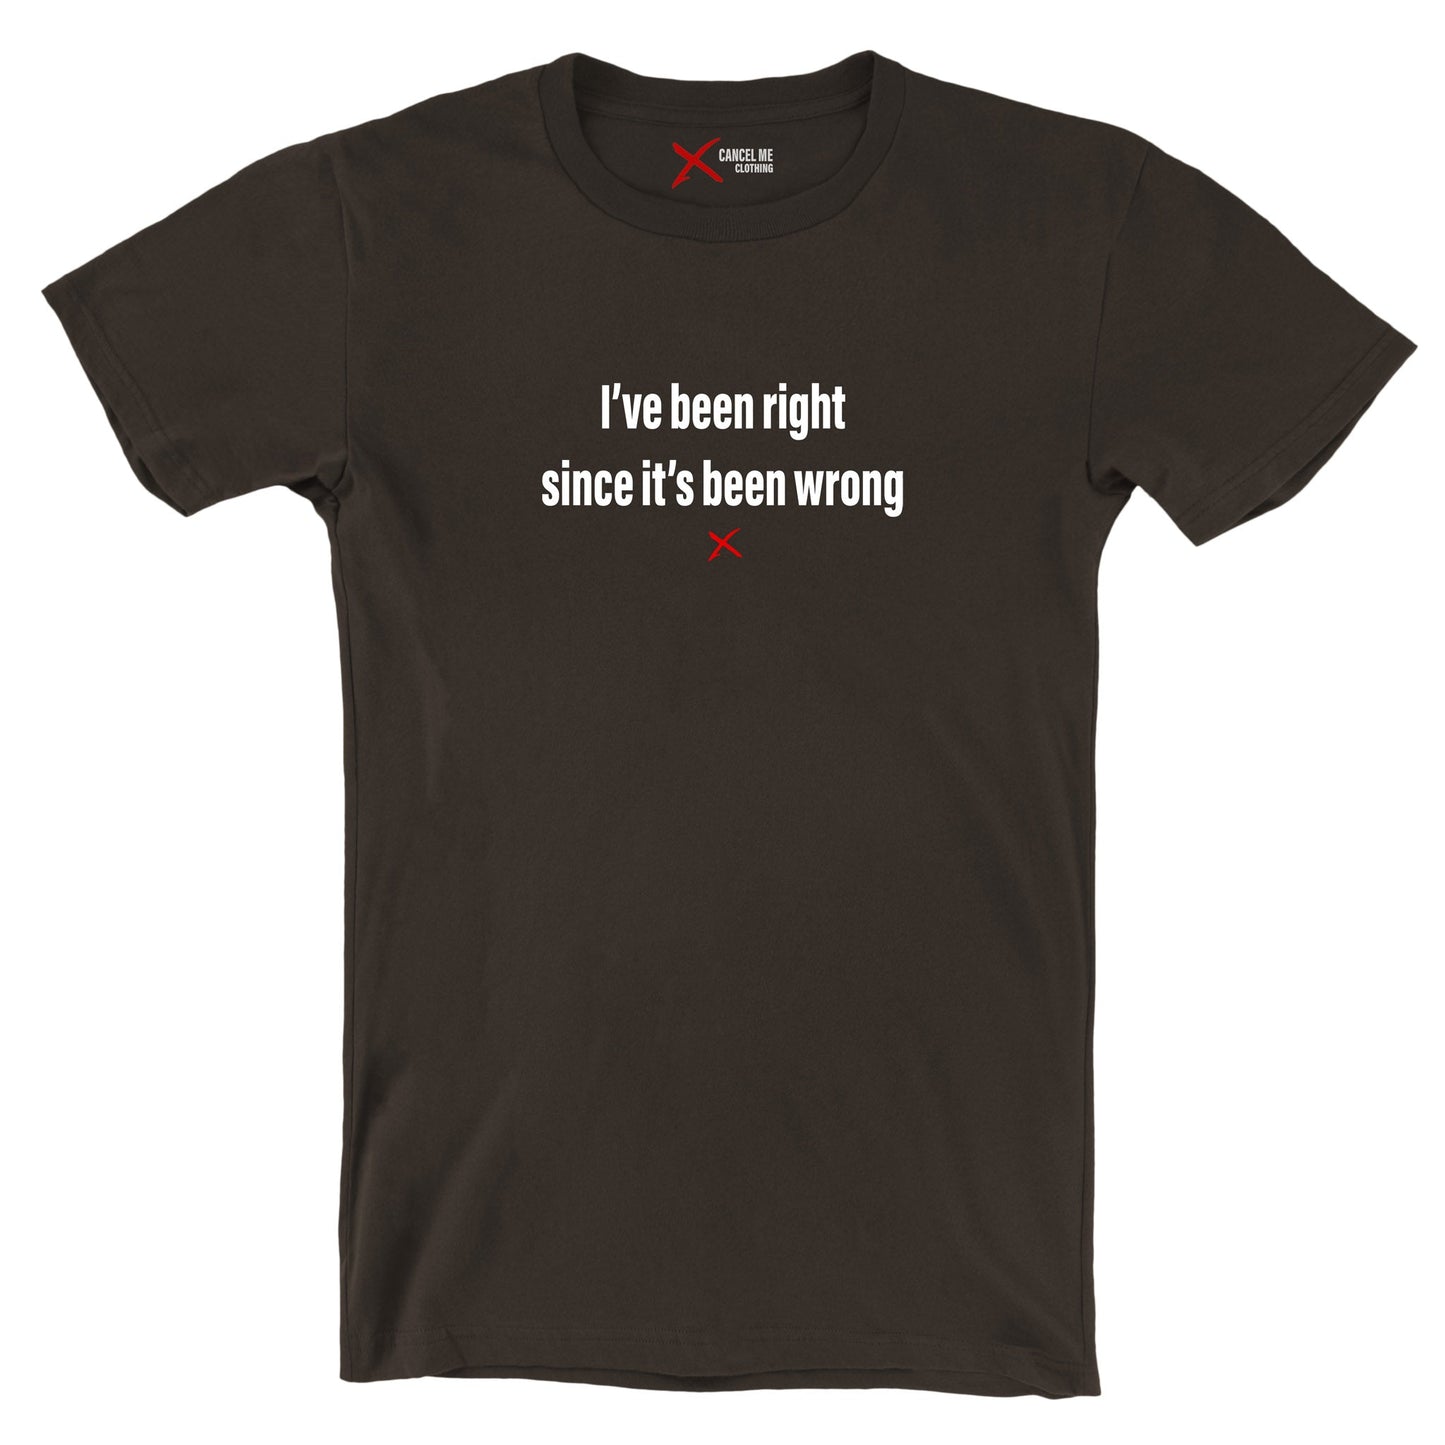 I've been right since it's been wrong - Shirt